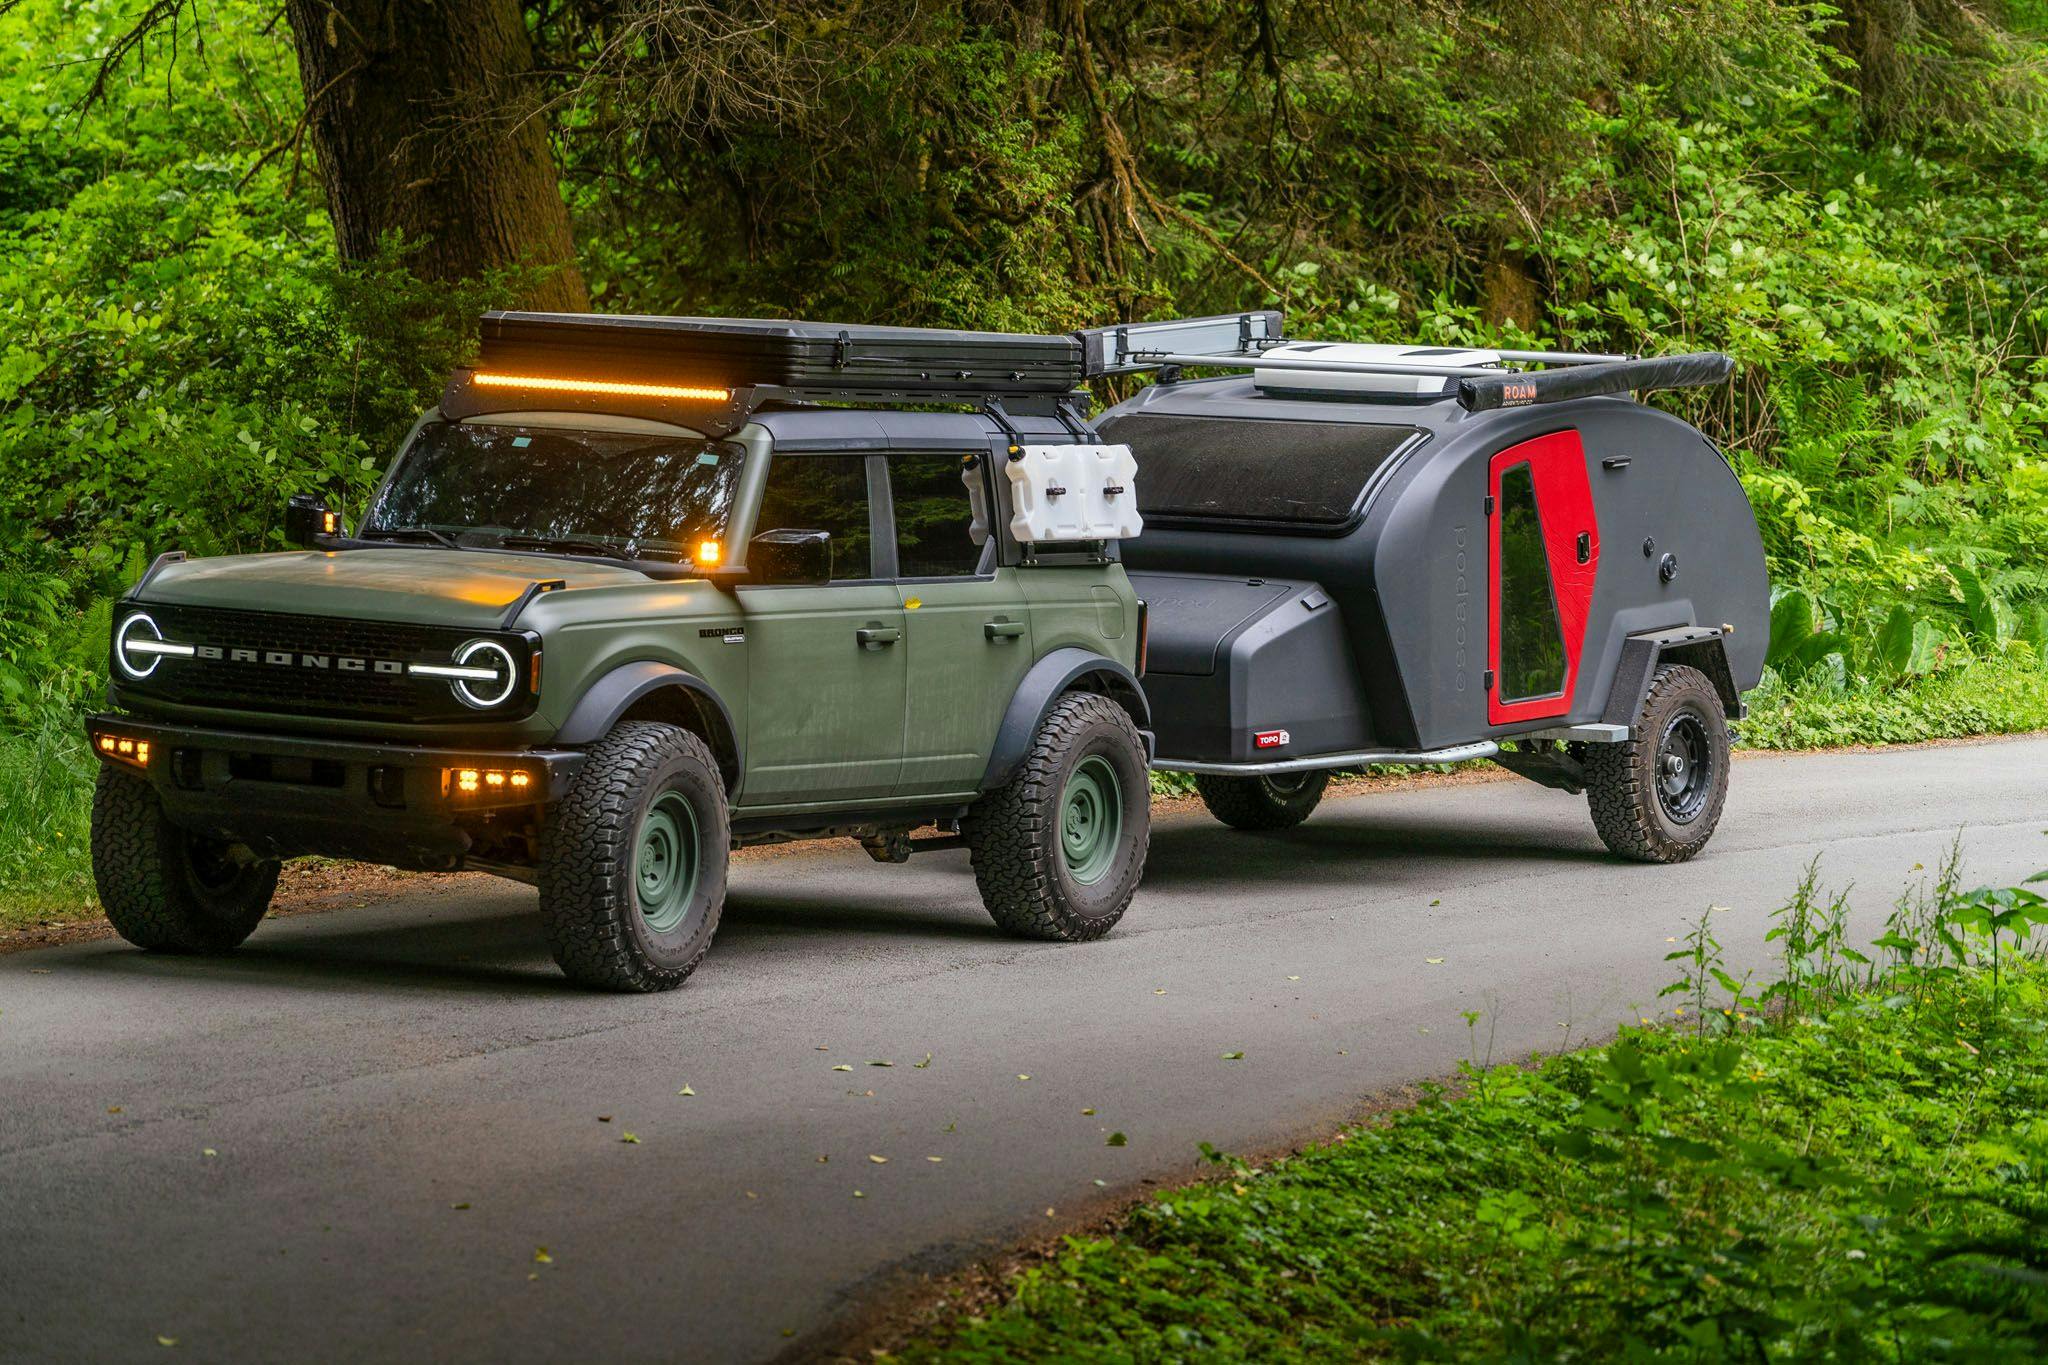 A TOPO2 being towed by a Ford Bronco through lush green foilage.